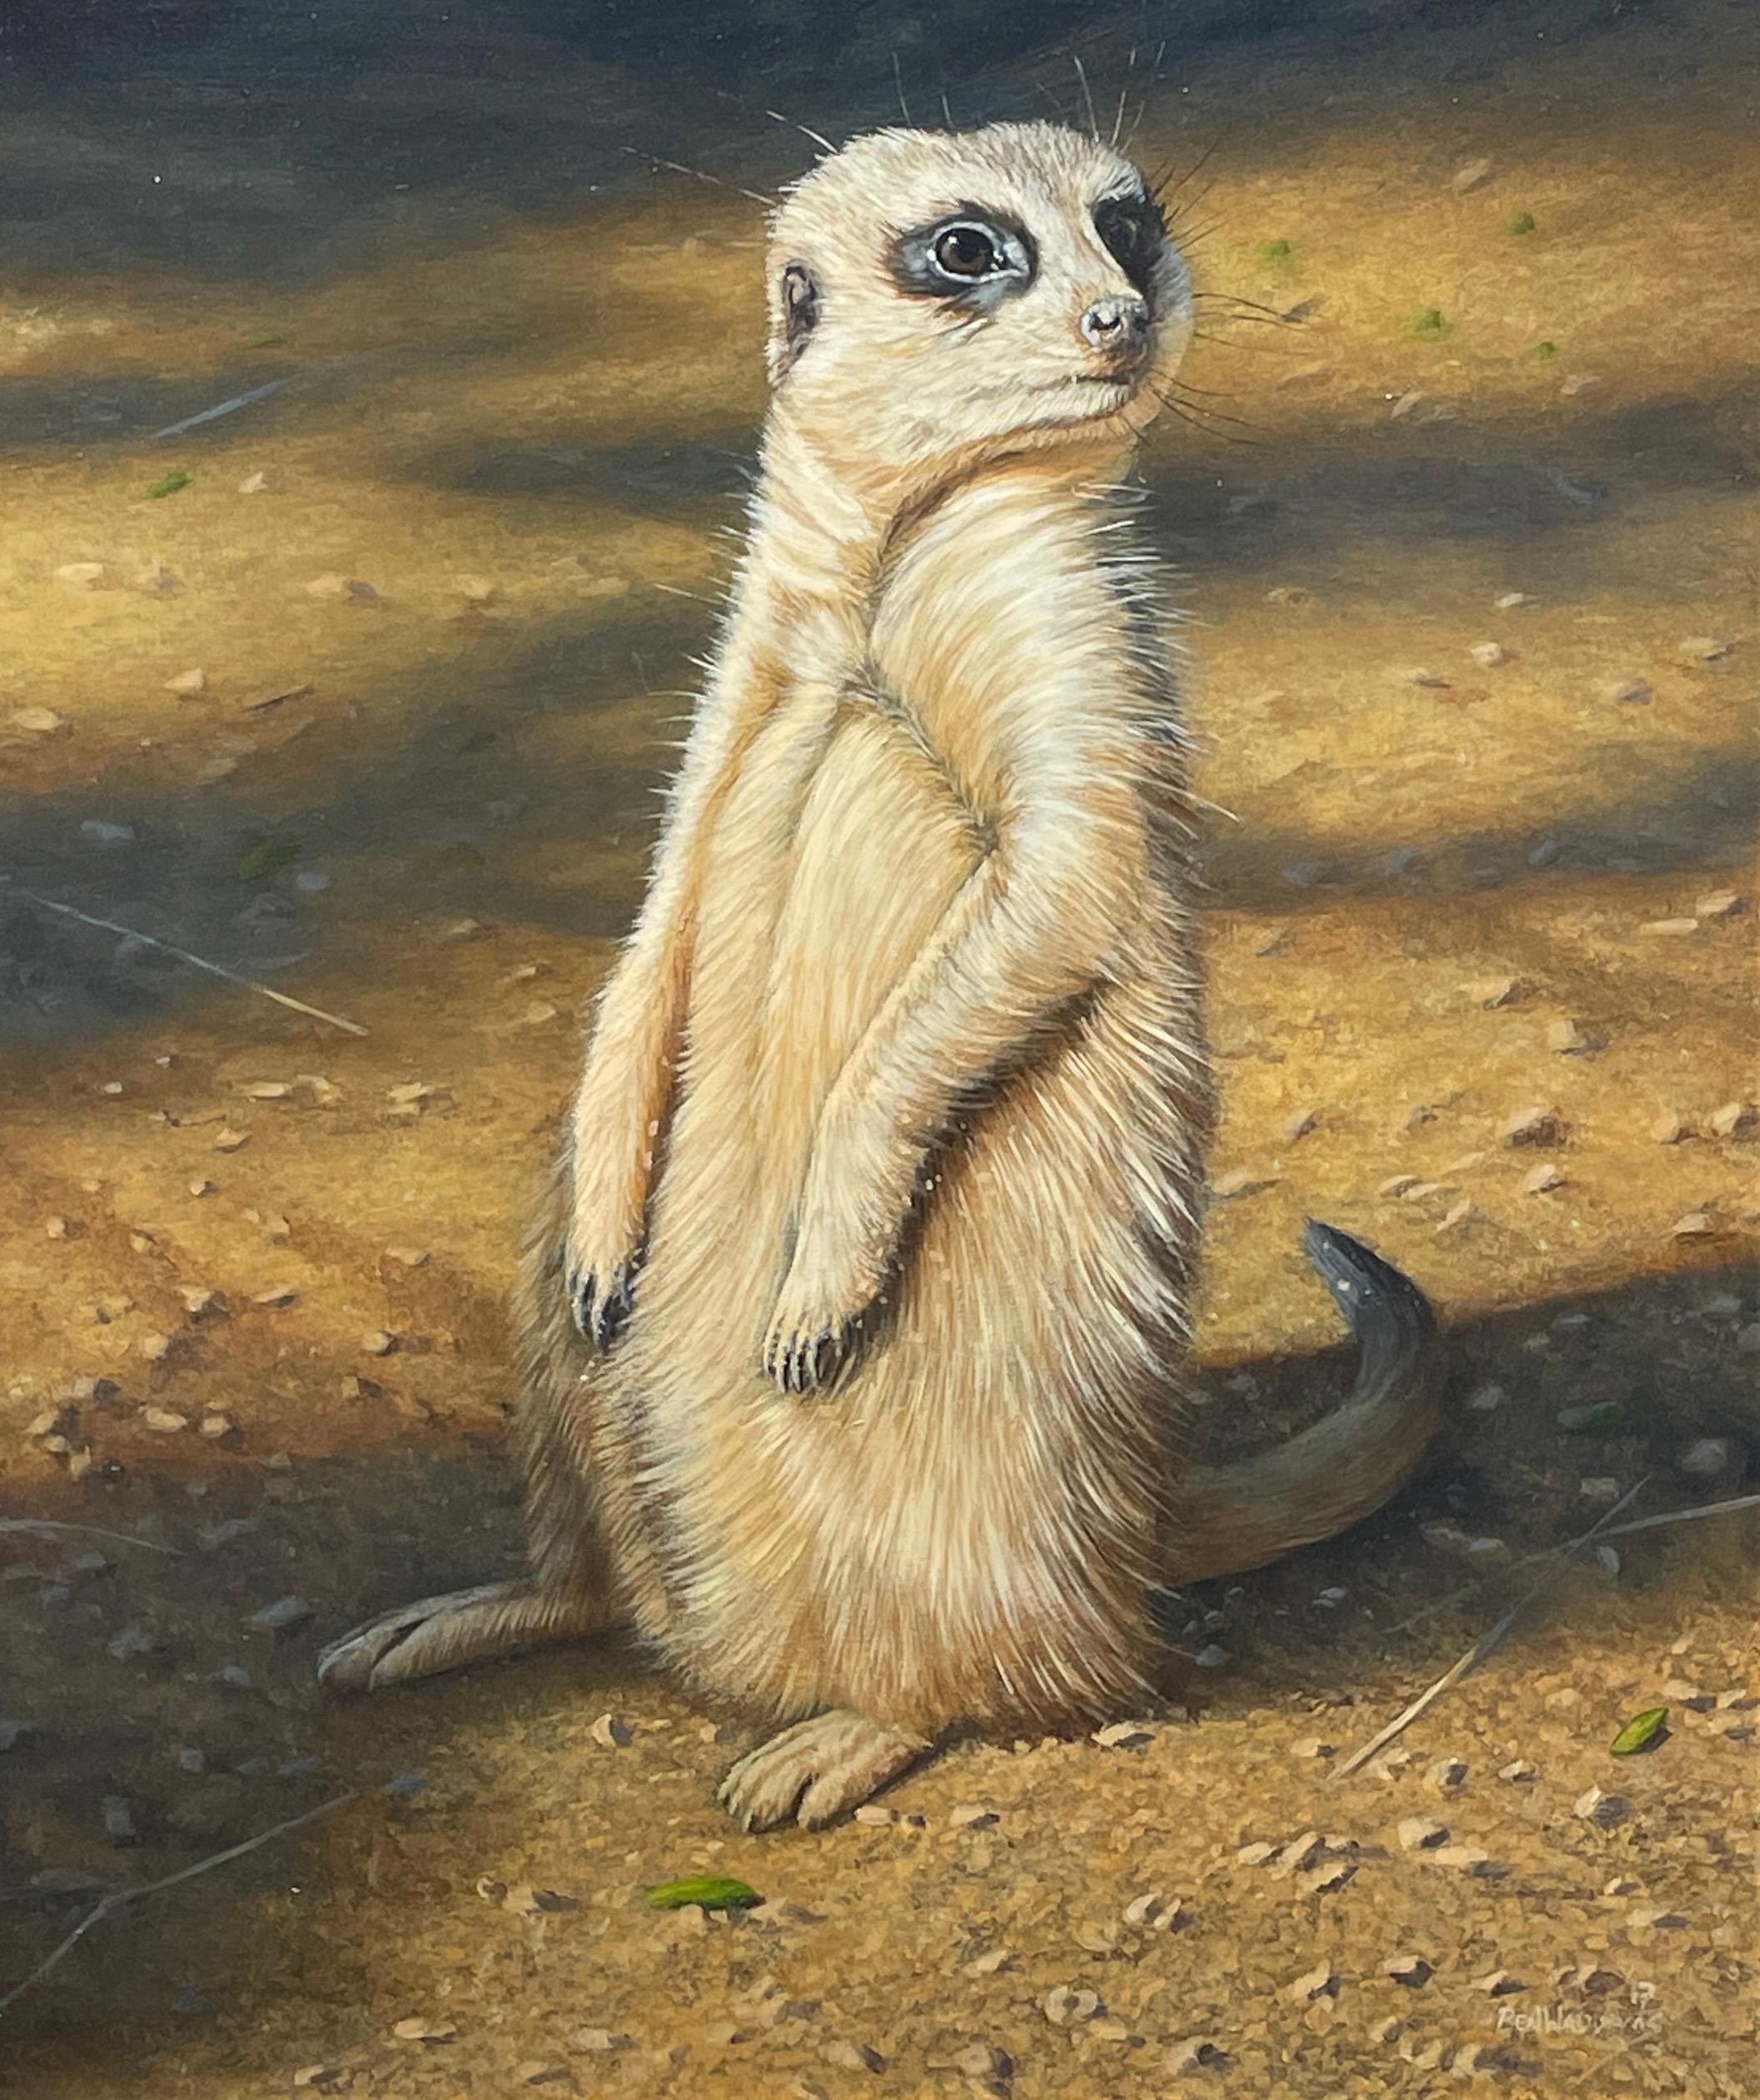 'The Sun Worshipper' Contemporary photorealist painting of a Meerkat in the wild